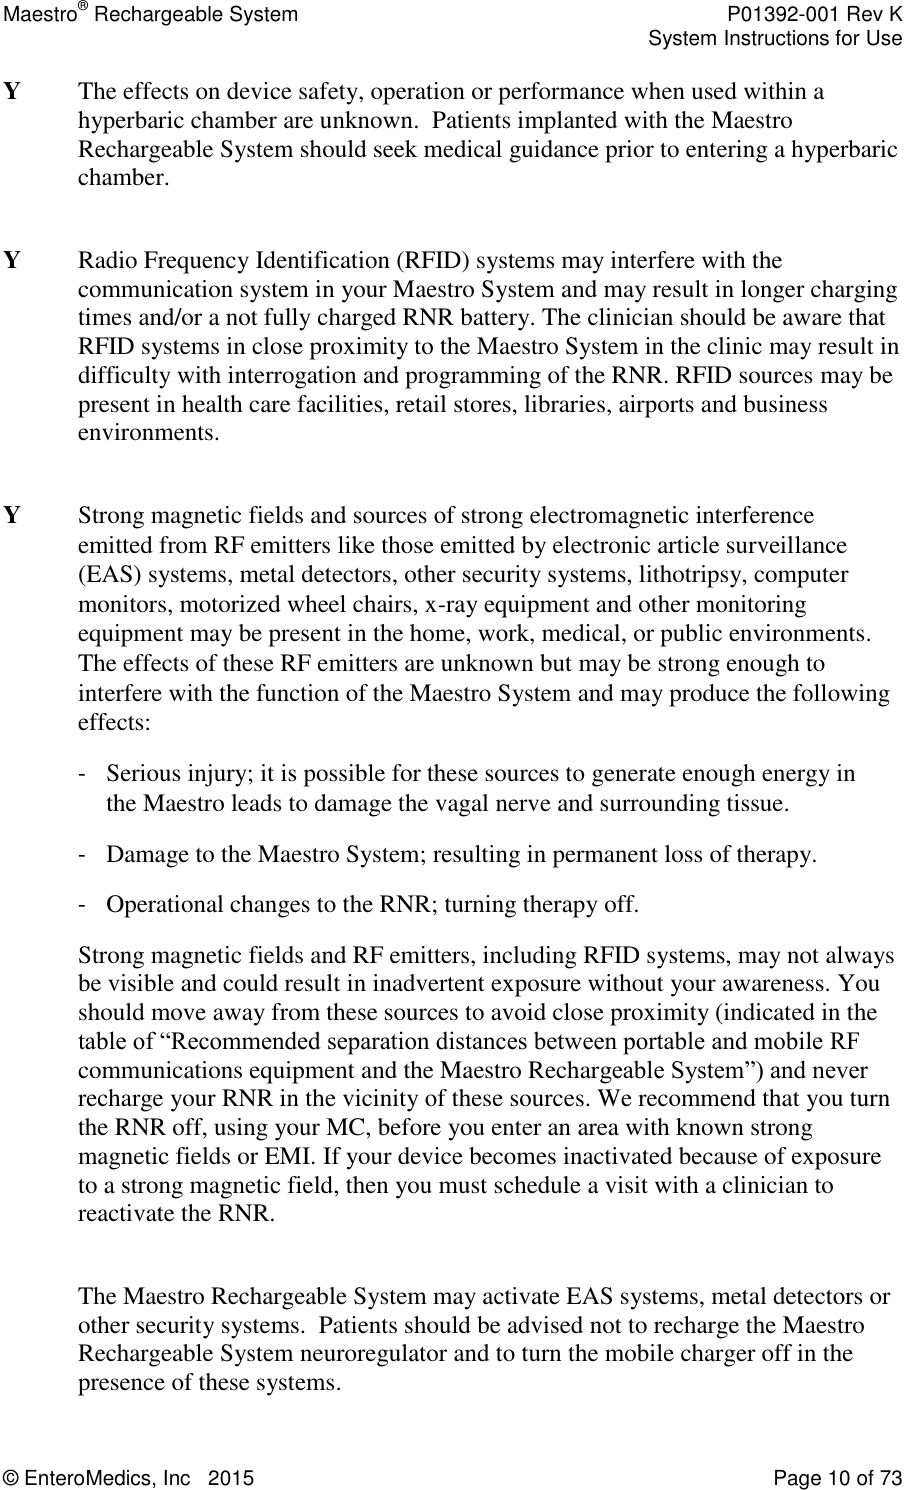 Maestro® Rechargeable System    P01392-001 Rev K     System Instructions for Use  © EnteroMedics, Inc   2015  Page 10 of 73  Y  The effects on device safety, operation or performance when used within a hyperbaric chamber are unknown.  Patients implanted with the Maestro Rechargeable System should seek medical guidance prior to entering a hyperbaric chamber.  Y   Radio Frequency Identification (RFID) systems may interfere with the communication system in your Maestro System and may result in longer charging times and/or a not fully charged RNR battery. The clinician should be aware that RFID systems in close proximity to the Maestro System in the clinic may result in difficulty with interrogation and programming of the RNR. RFID sources may be present in health care facilities, retail stores, libraries, airports and business environments.  Y   Strong magnetic fields and sources of strong electromagnetic interference emitted from RF emitters like those emitted by electronic article surveillance (EAS) systems, metal detectors, other security systems, lithotripsy, computer monitors, motorized wheel chairs, x-ray equipment and other monitoring equipment may be present in the home, work, medical, or public environments. The effects of these RF emitters are unknown but may be strong enough to interfere with the function of the Maestro System and may produce the following effects:   - Serious injury; it is possible for these sources to generate enough energy in the Maestro leads to damage the vagal nerve and surrounding tissue. - Damage to the Maestro System; resulting in permanent loss of therapy. - Operational changes to the RNR; turning therapy off. Strong magnetic fields and RF emitters, including RFID systems, may not always be visible and could result in inadvertent exposure without your awareness. You should move away from these sources to avoid close proximity (indicated in the table of “Recommended separation distances between portable and mobile RF communications equipment and the Maestro Rechargeable System”) and never recharge your RNR in the vicinity of these sources. We recommend that you turn the RNR off, using your MC, before you enter an area with known strong magnetic fields or EMI. If your device becomes inactivated because of exposure to a strong magnetic field, then you must schedule a visit with a clinician to reactivate the RNR.   The Maestro Rechargeable System may activate EAS systems, metal detectors or other security systems.  Patients should be advised not to recharge the Maestro Rechargeable System neuroregulator and to turn the mobile charger off in the presence of these systems.  